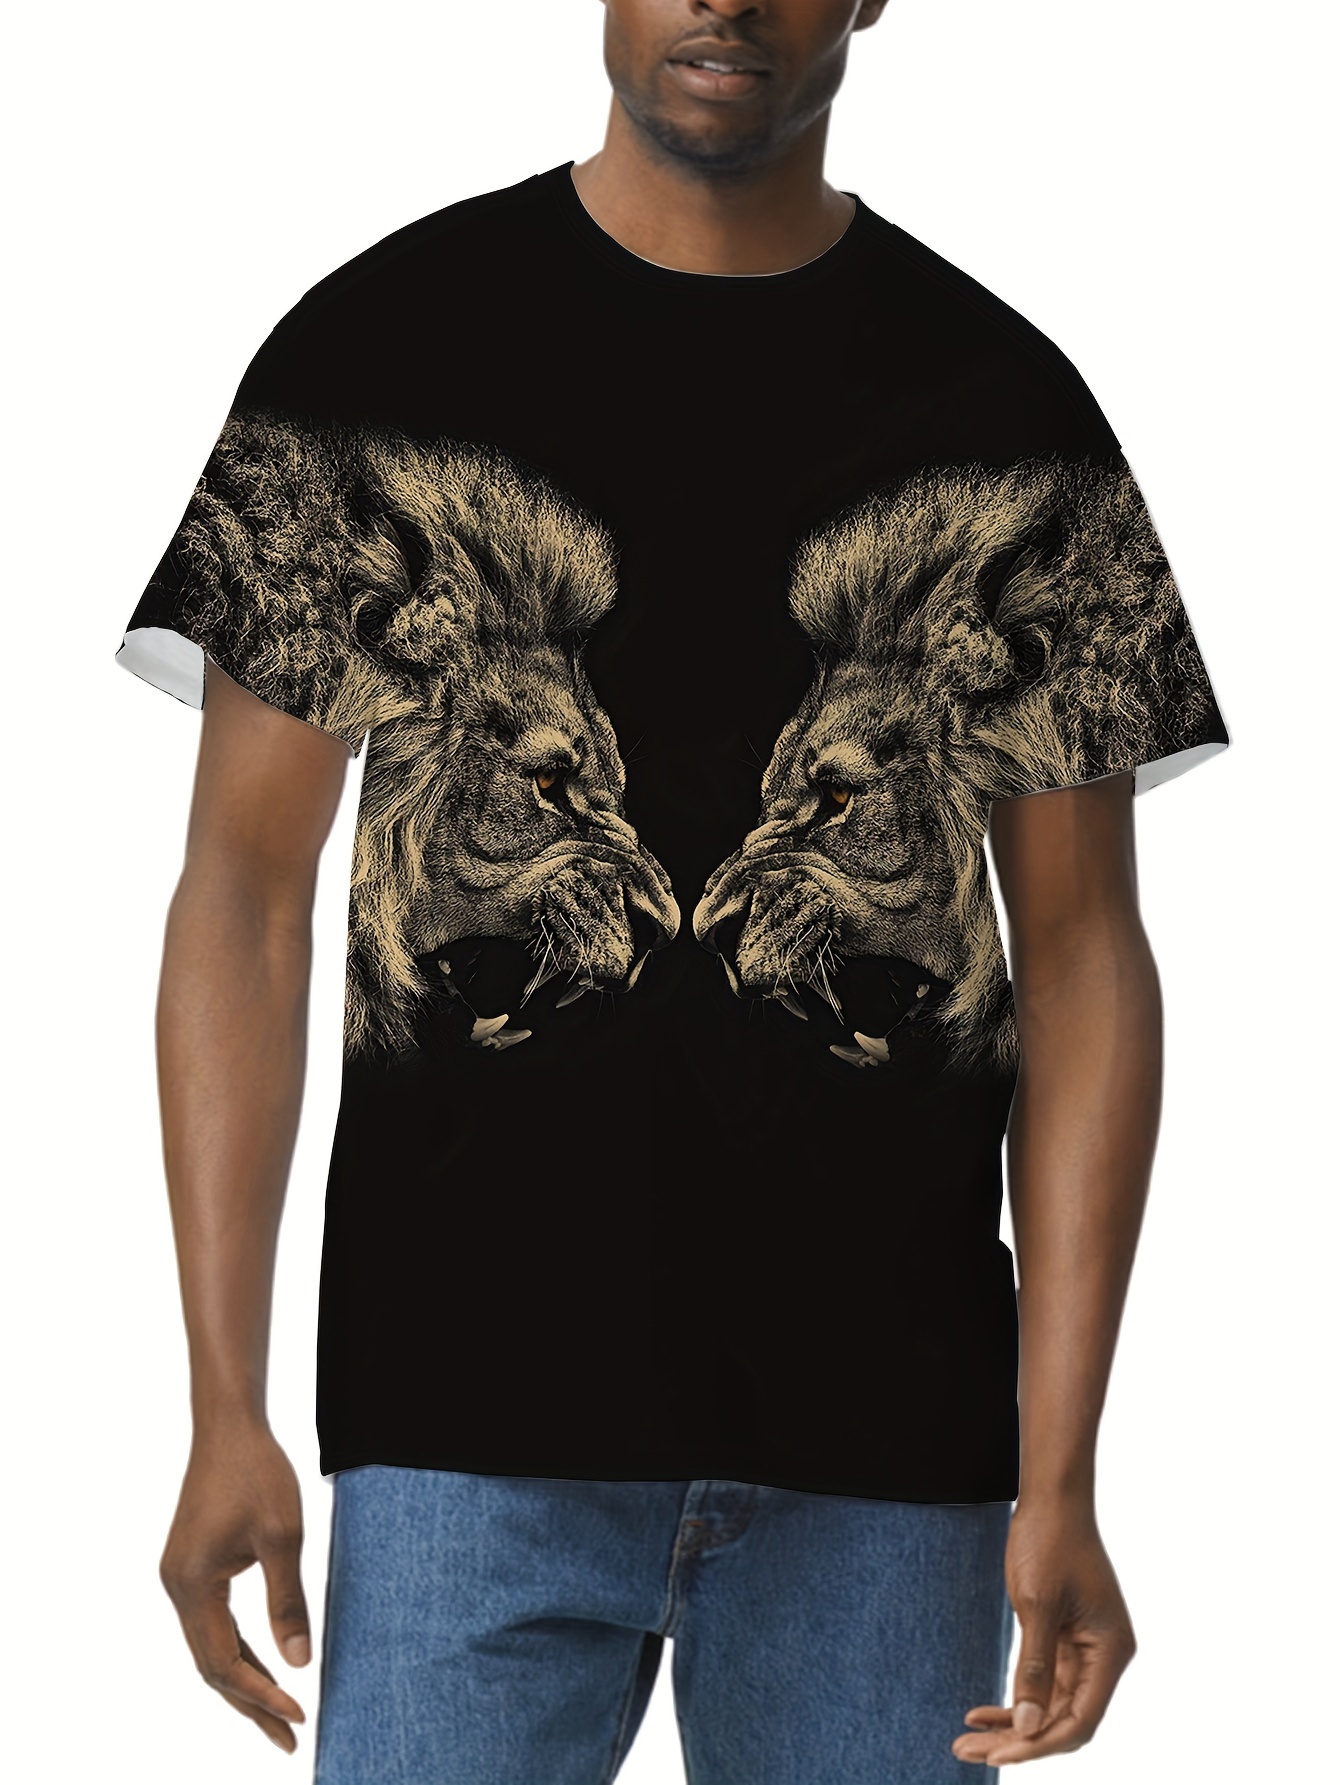  Nature Graphic Tees By Black Lantern – Screen Printed 100%  Cotton Short Sleeve T-Shirt, Moose and Mountains Design (Sizes S-XXL) :  Handmade Products